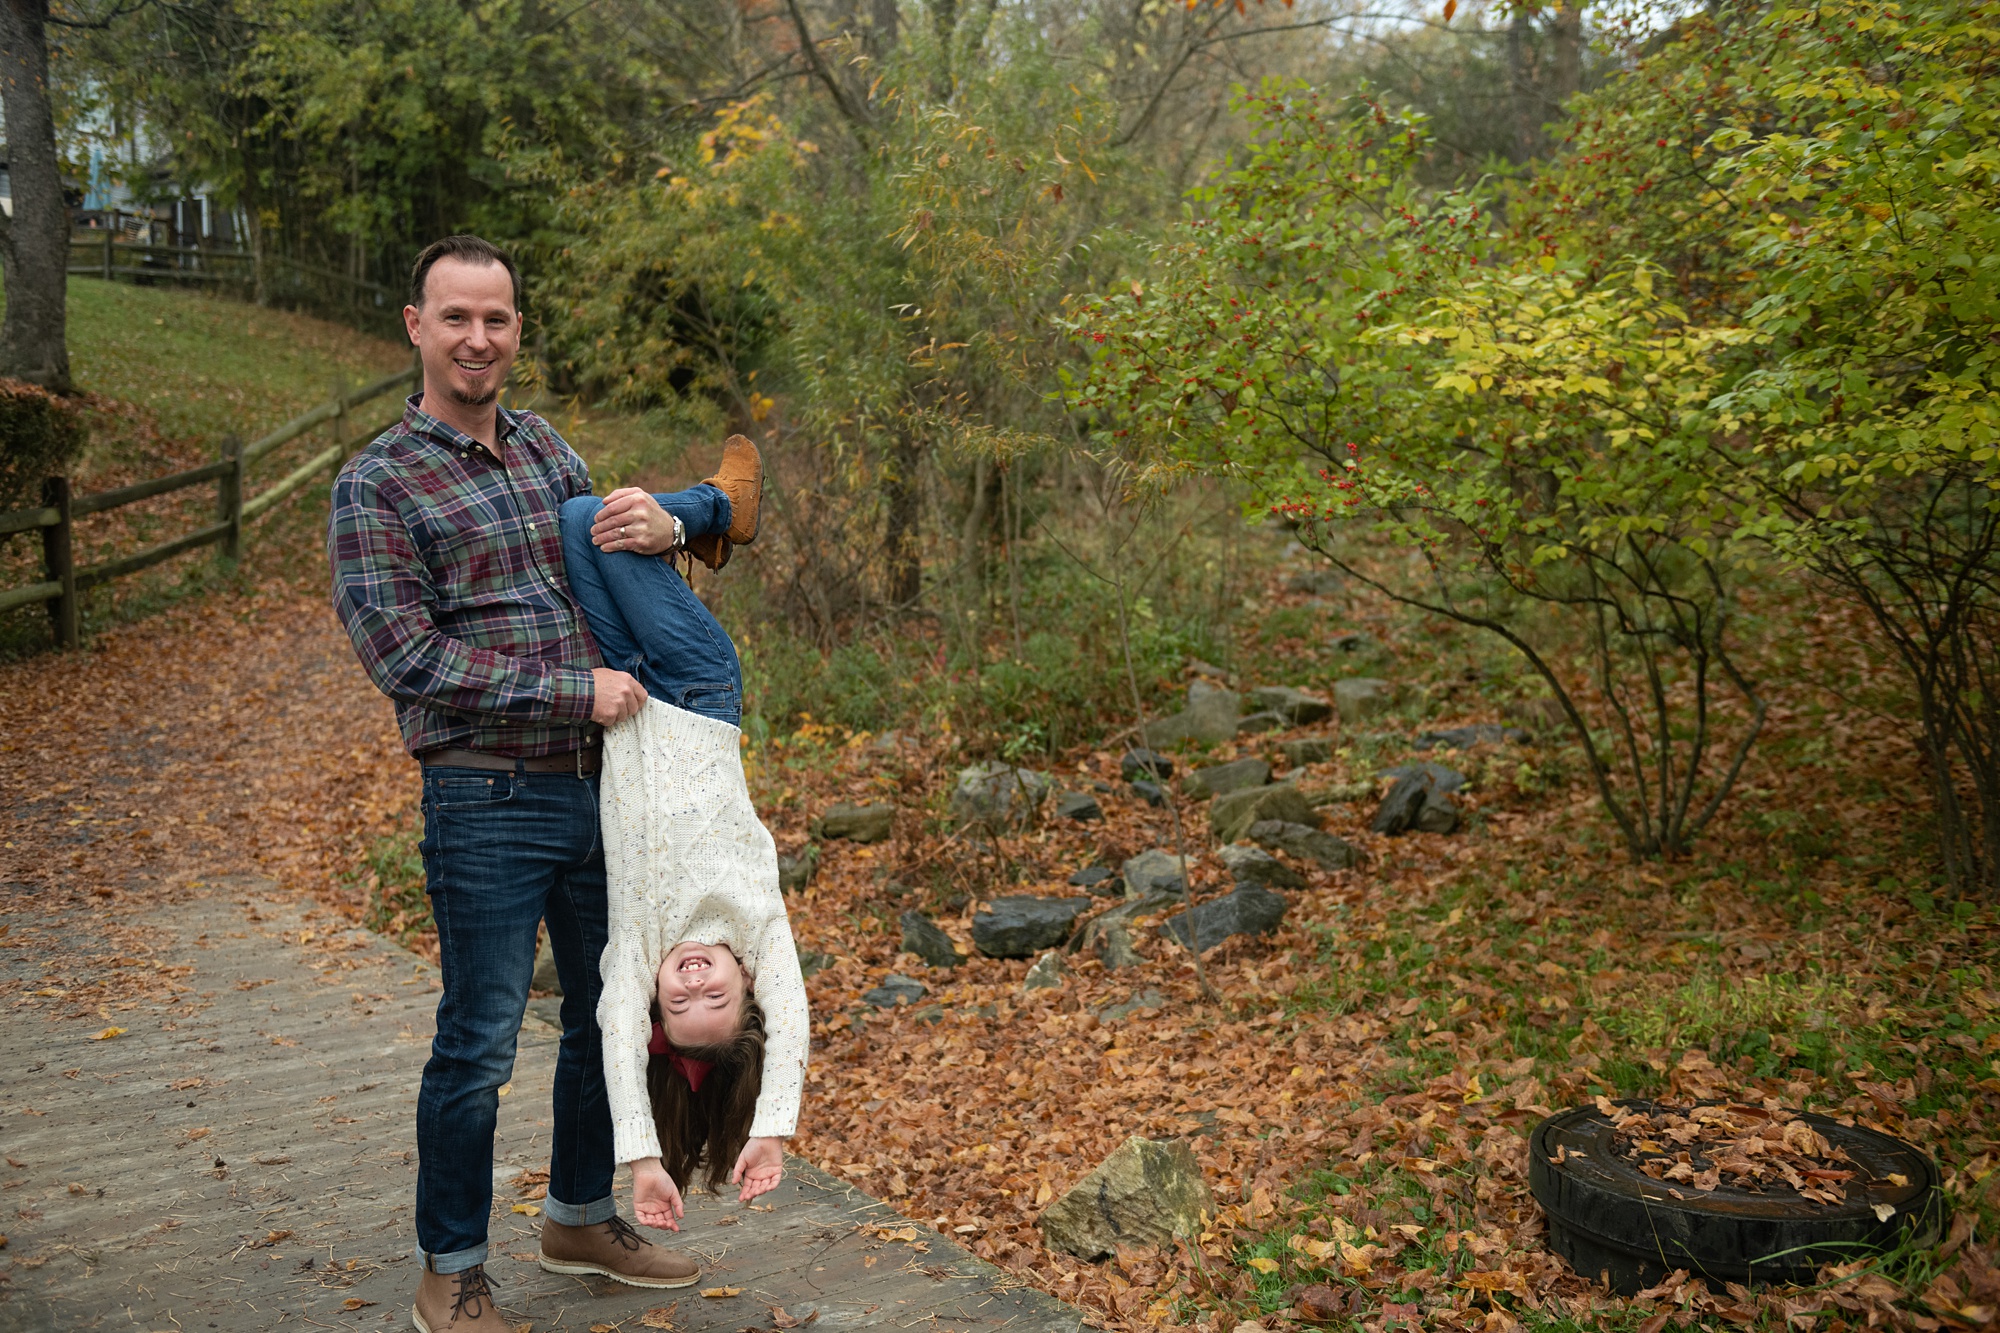 dad turns daughter upside down during MD family photos